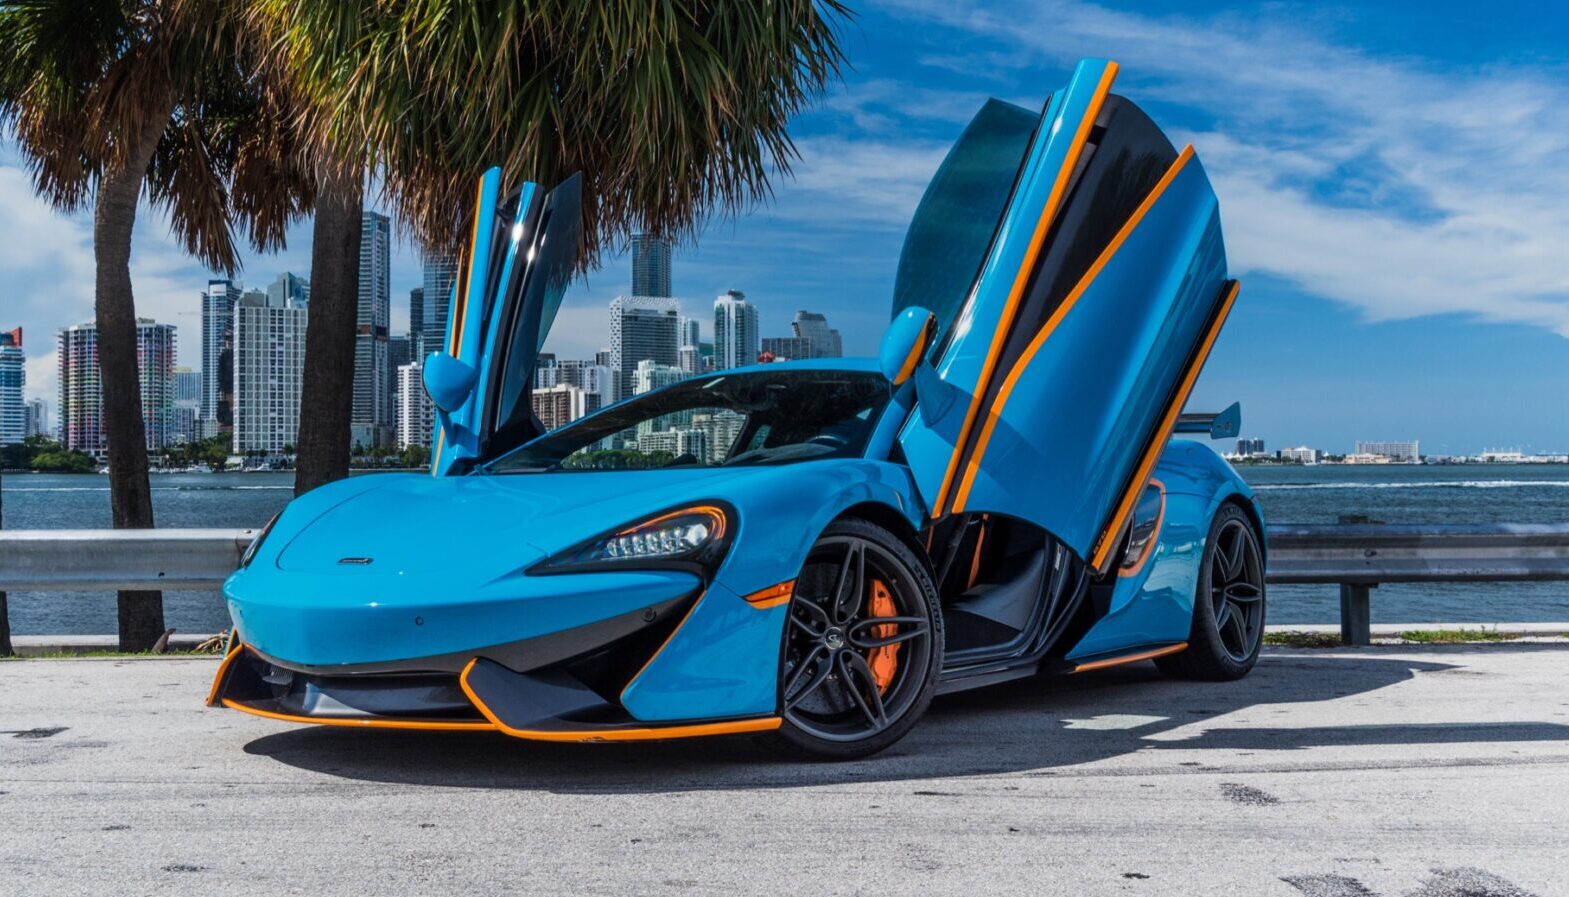 Mclaren 570s Coupe Blue and Orange on Orange exotic rental cars yacht charters Miami